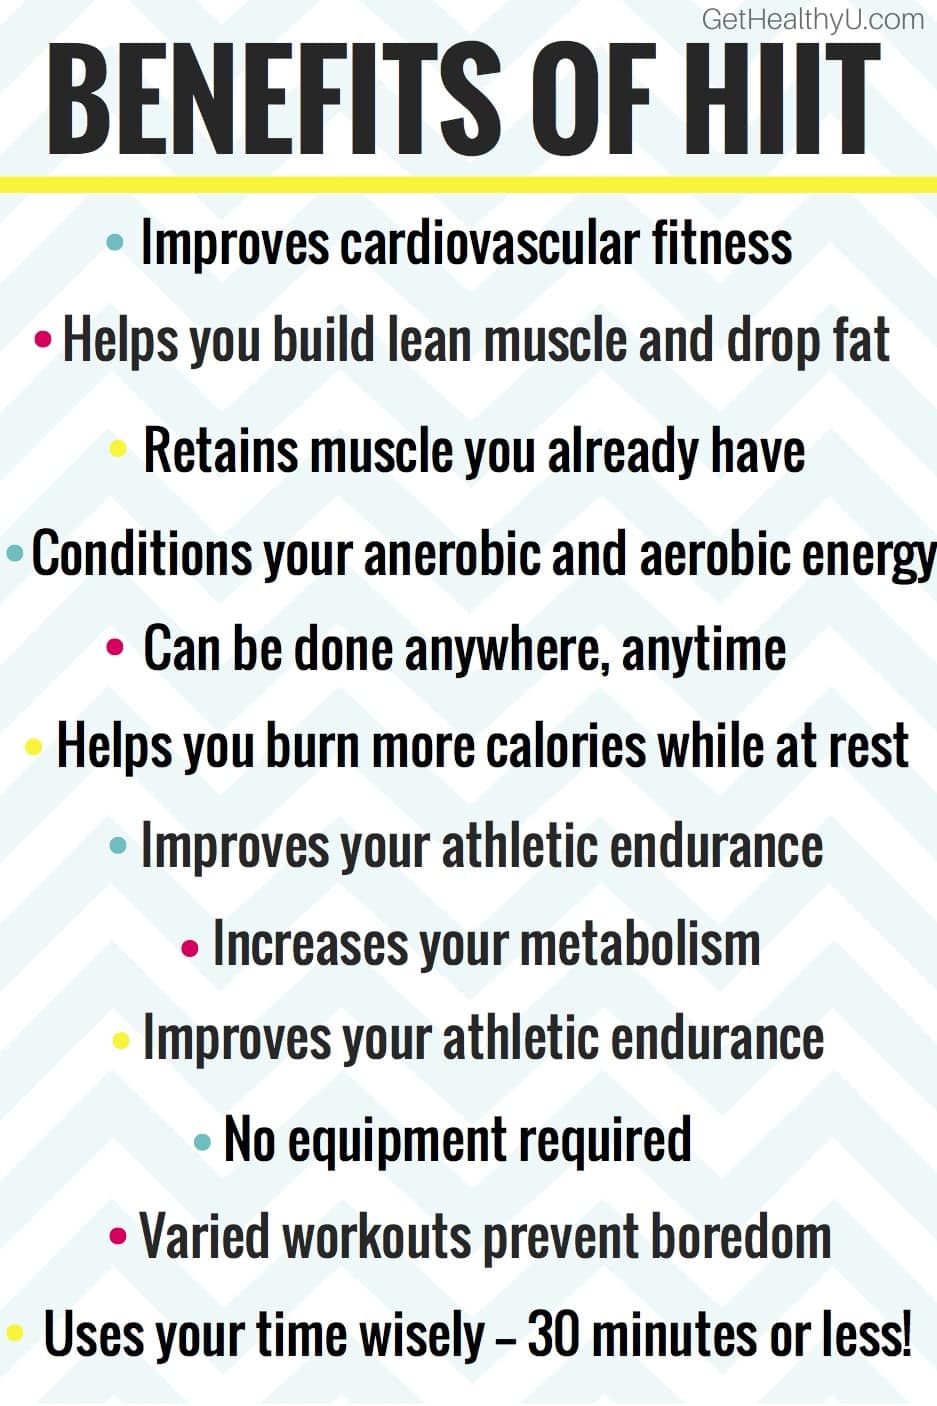 Benefits of HIIT with a poster listing all of its benefits